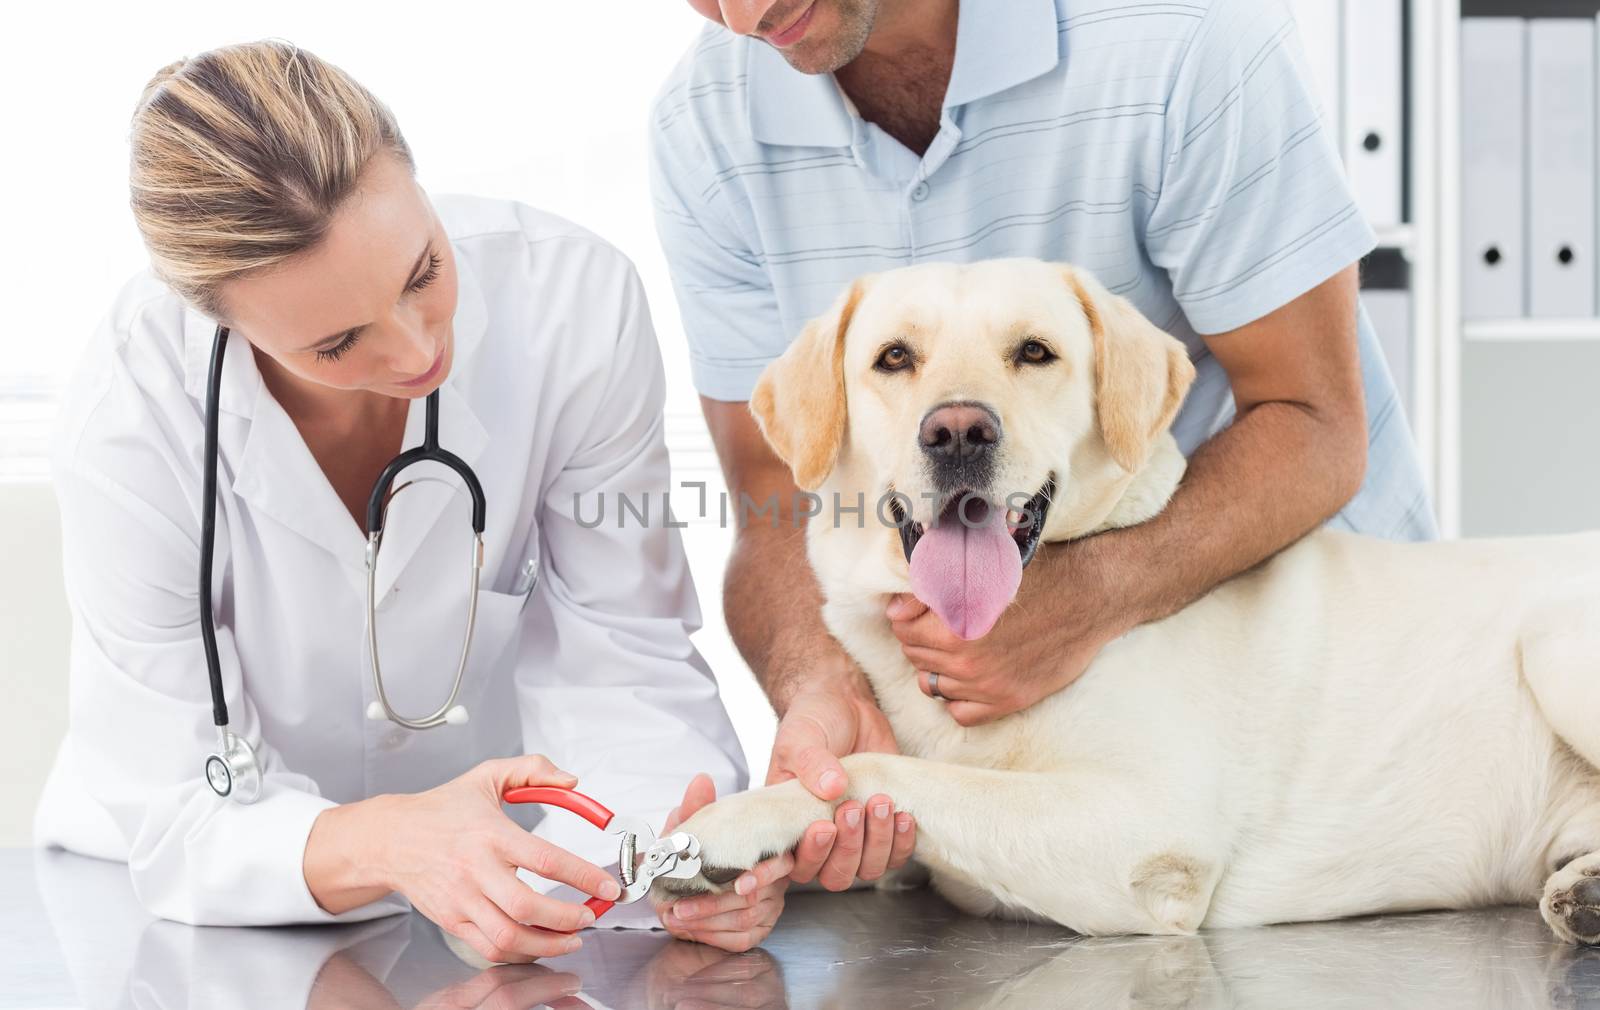 Male owner with dog getting claws trimmed by female vet in clinic